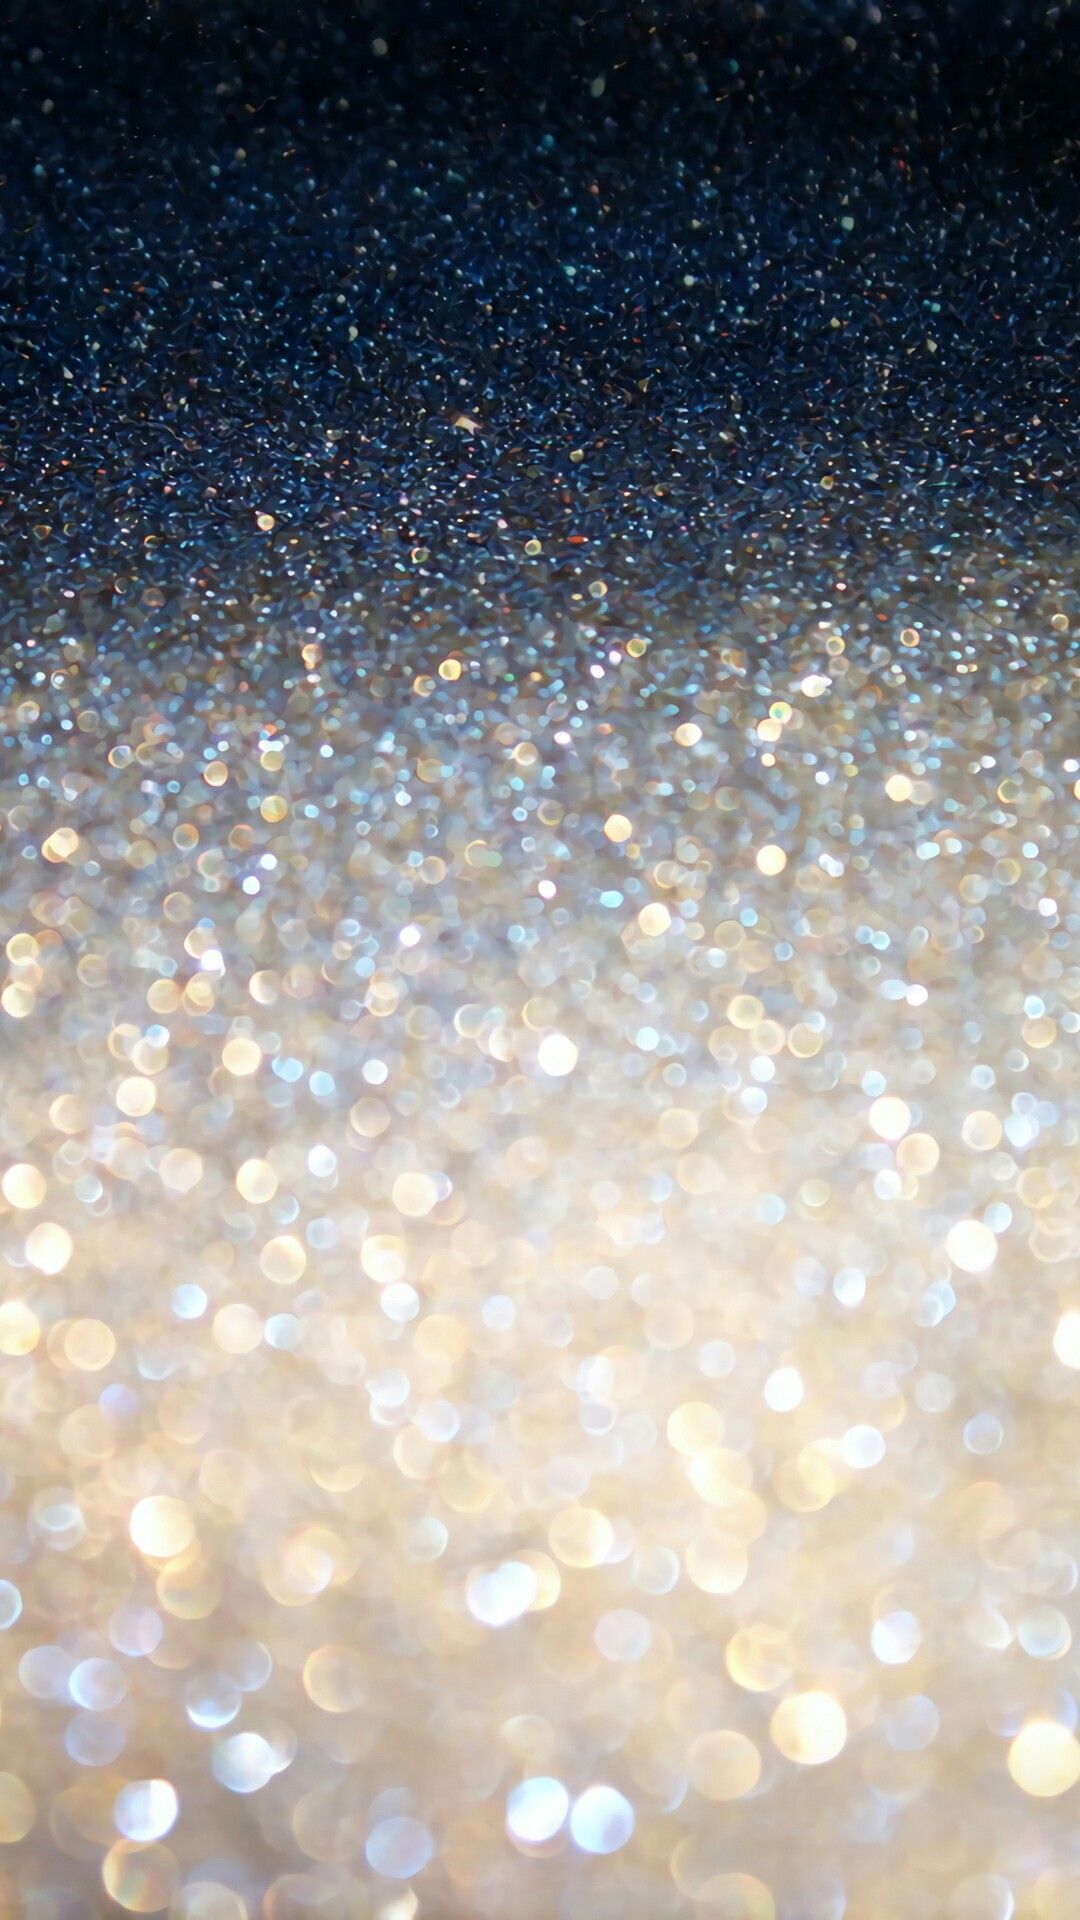 Discover 92+ sparkly iphone wallpaper best - in.coedo.com.vn